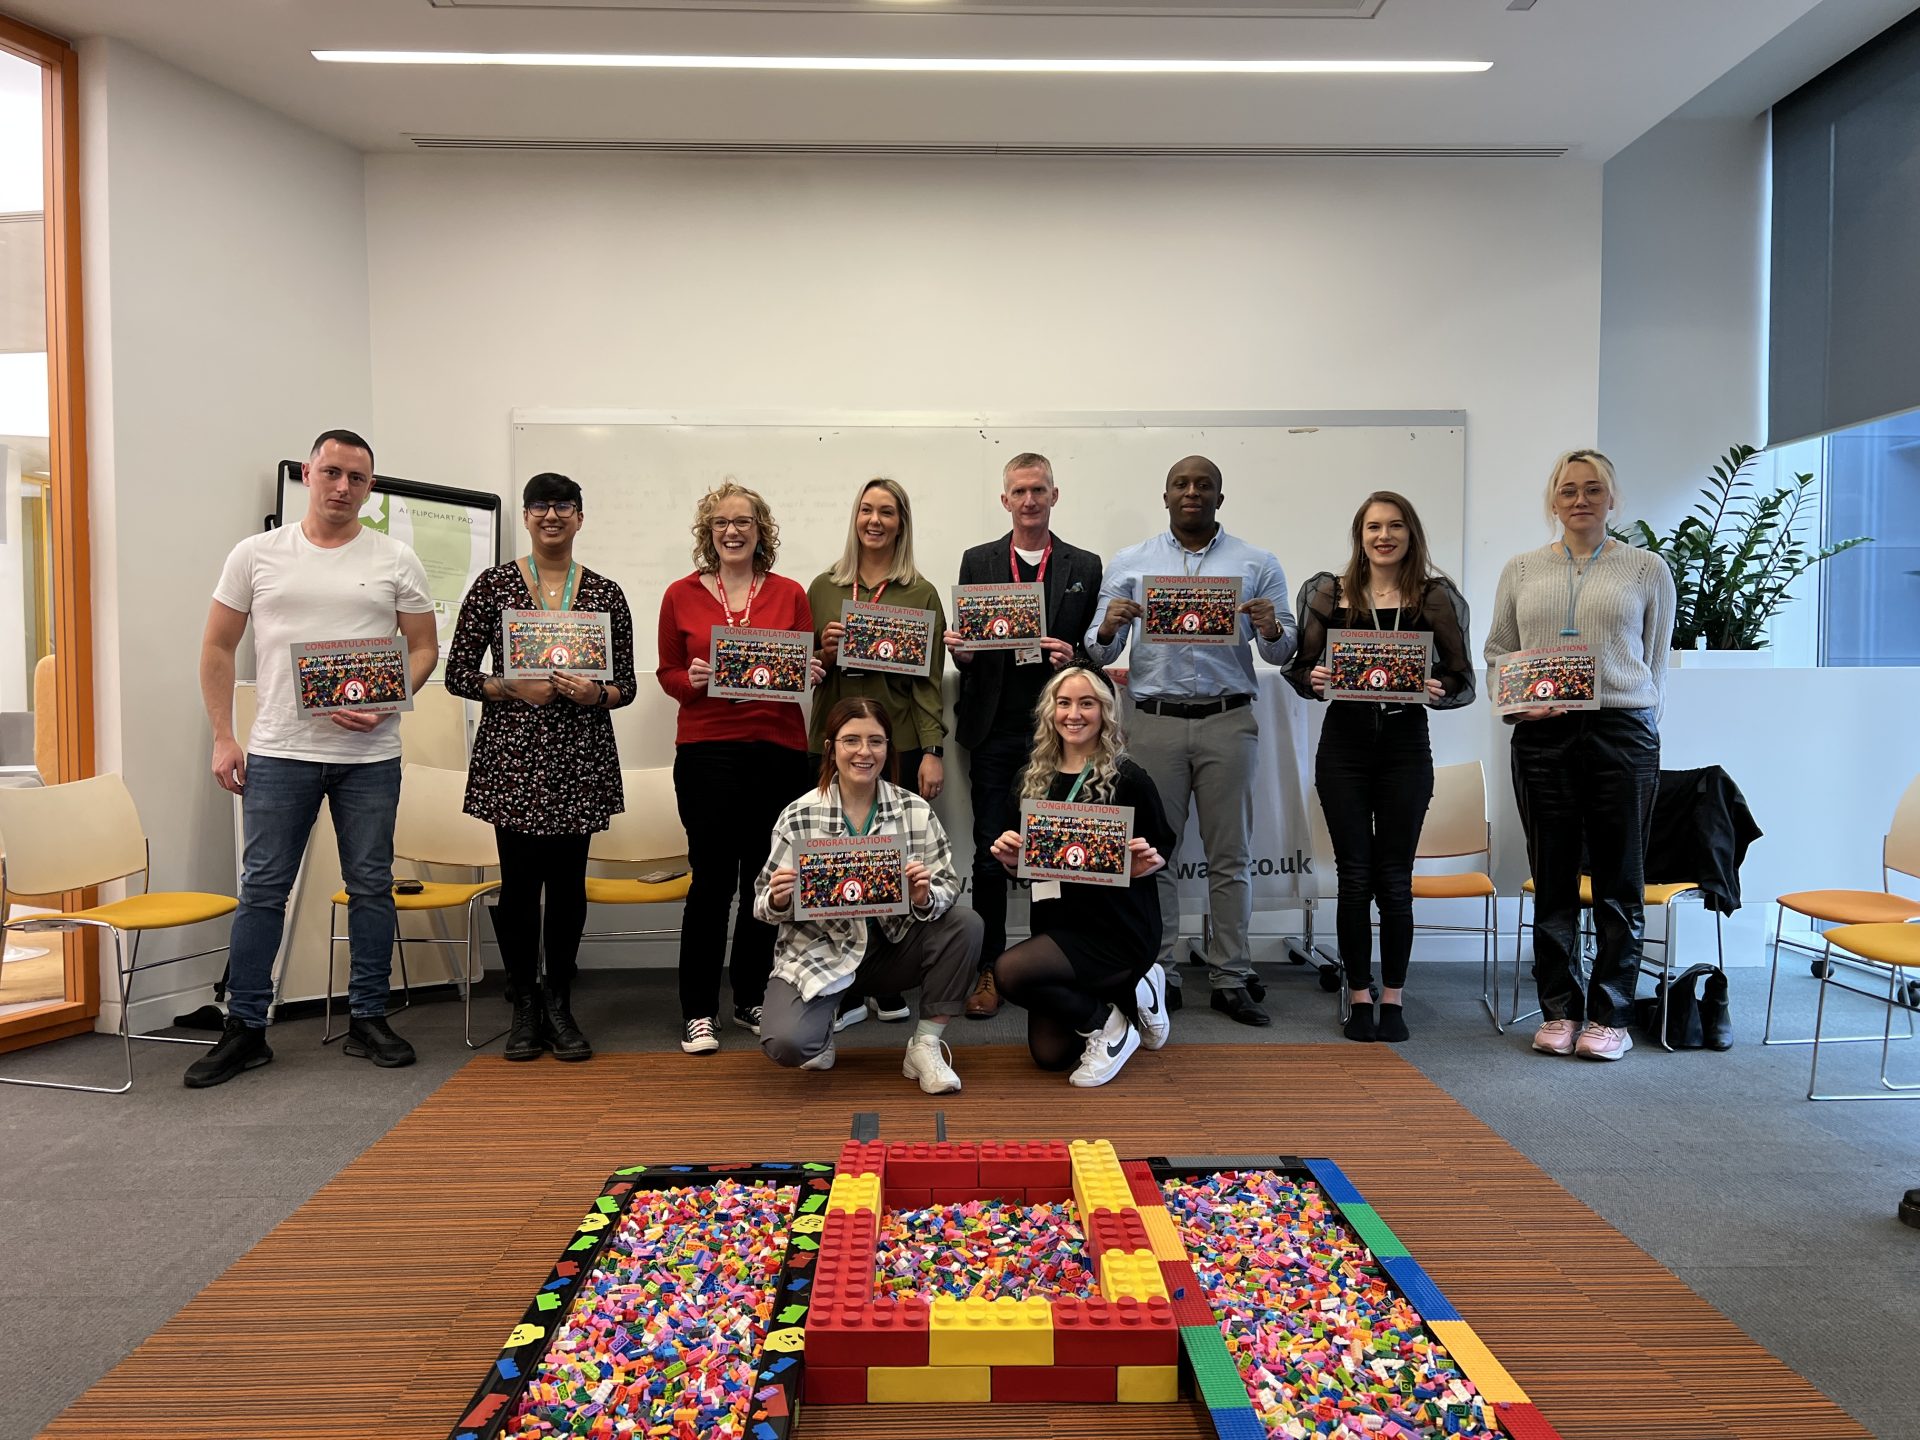 Peninsula Group colleagues at their Lego walk